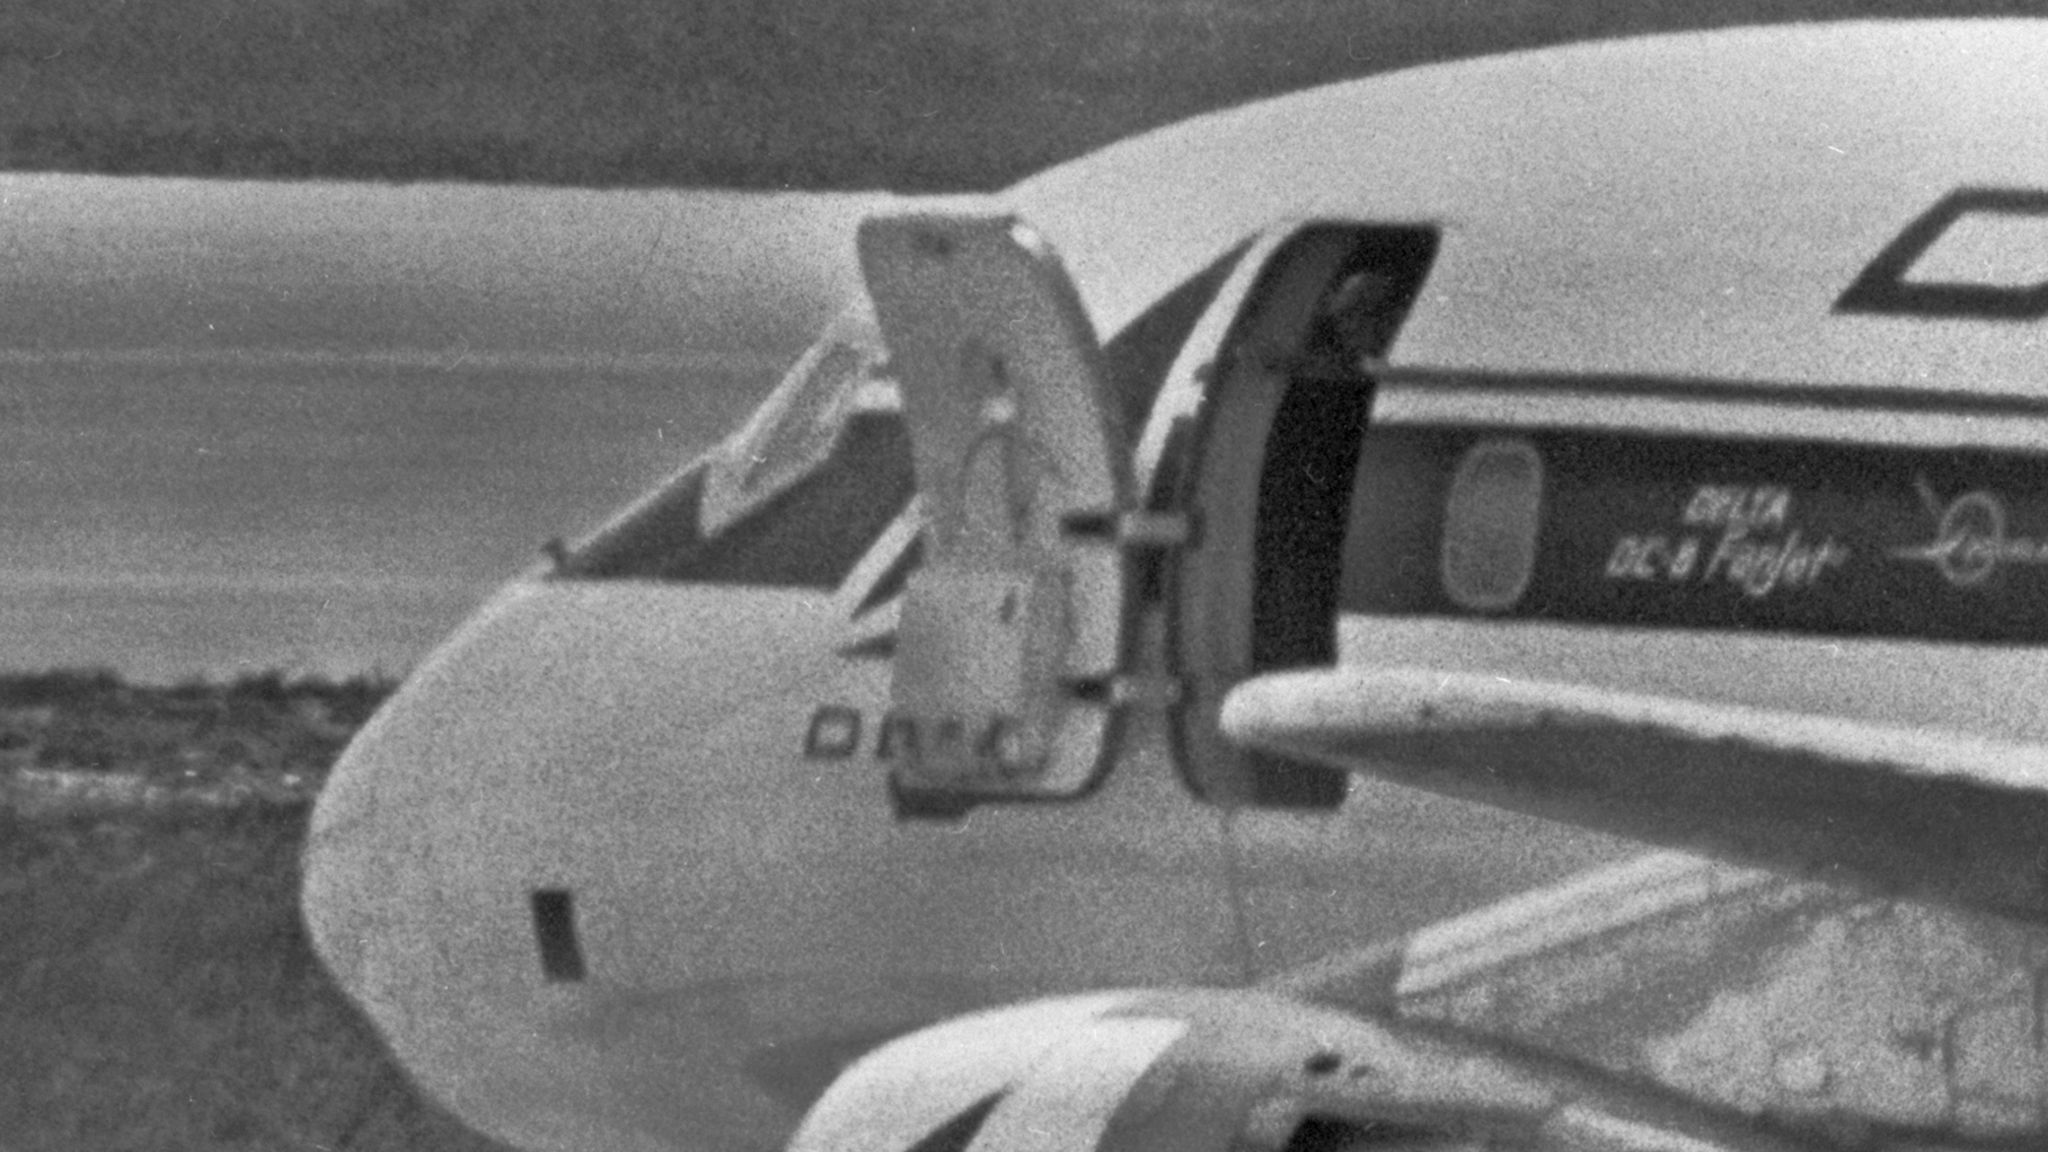 Melvin McNair at the door of the Delta airlines DC8 on 31 July 1972